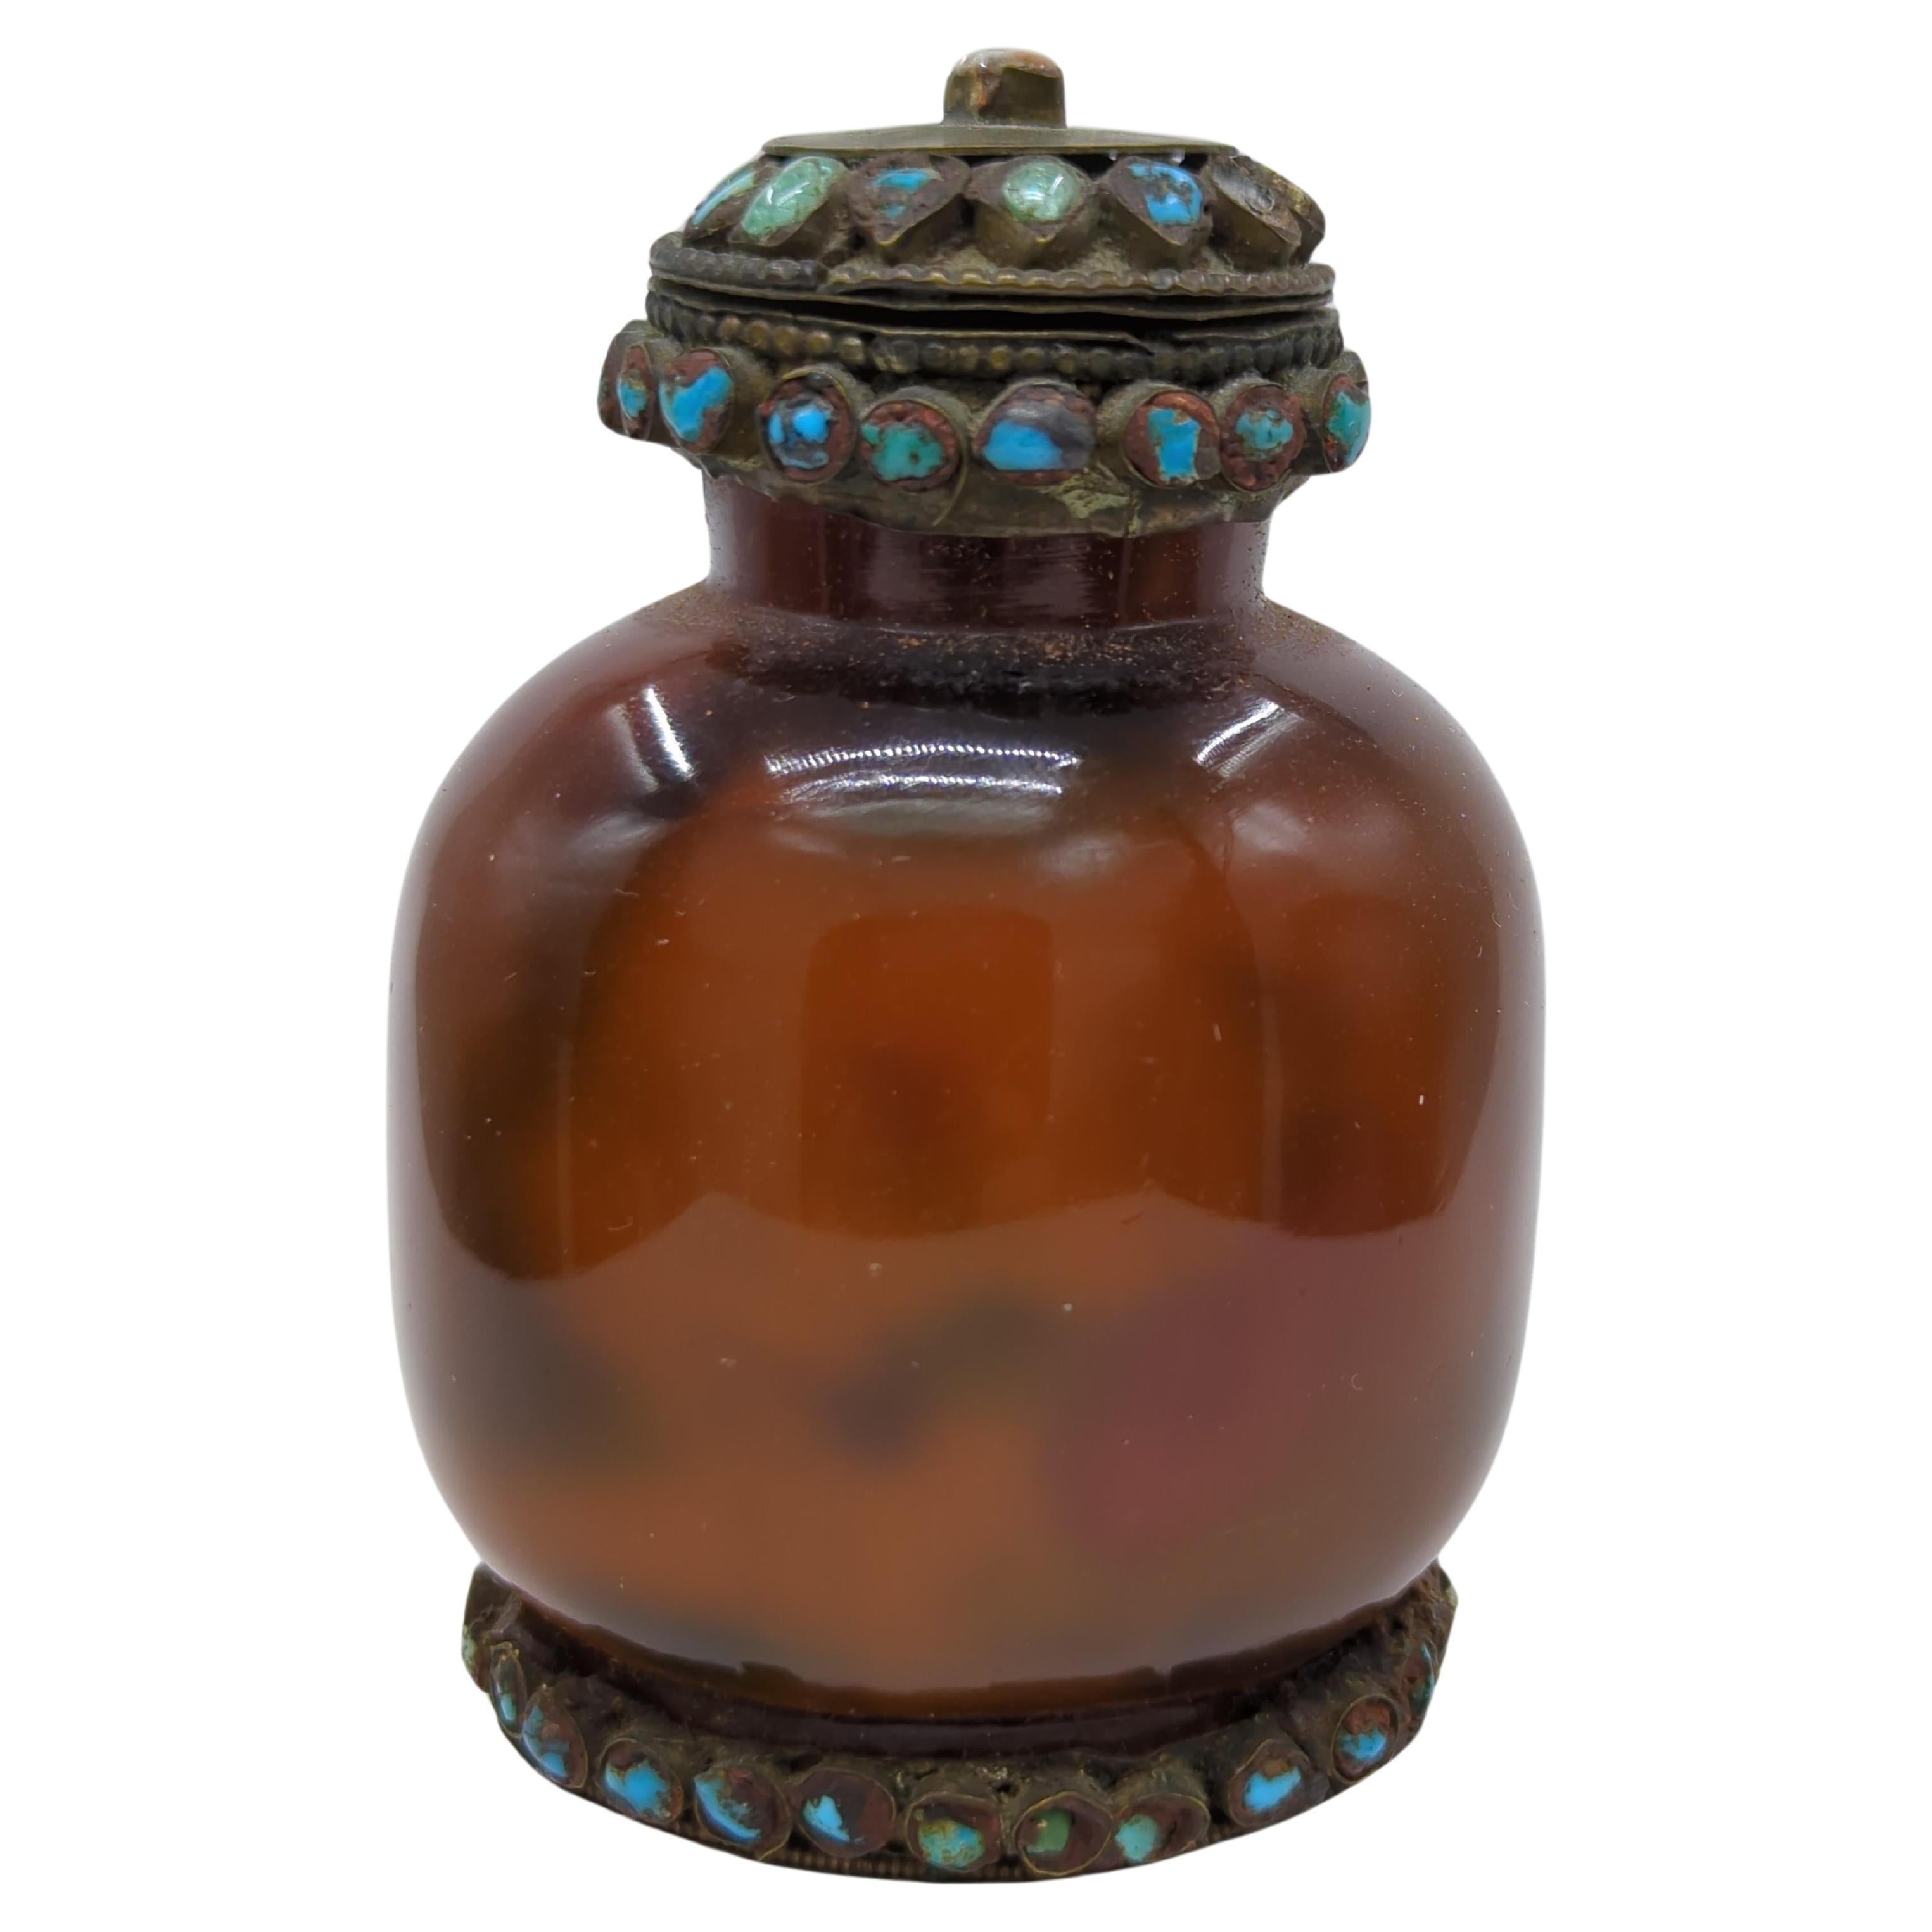 An antique Chinese snuff bottle from the late Qing period, crafted from amber glass, showcases the mysterious and intricate art of inside painting. This bottle features a continuous, delicately rendered scene of playful boys and a contemplative